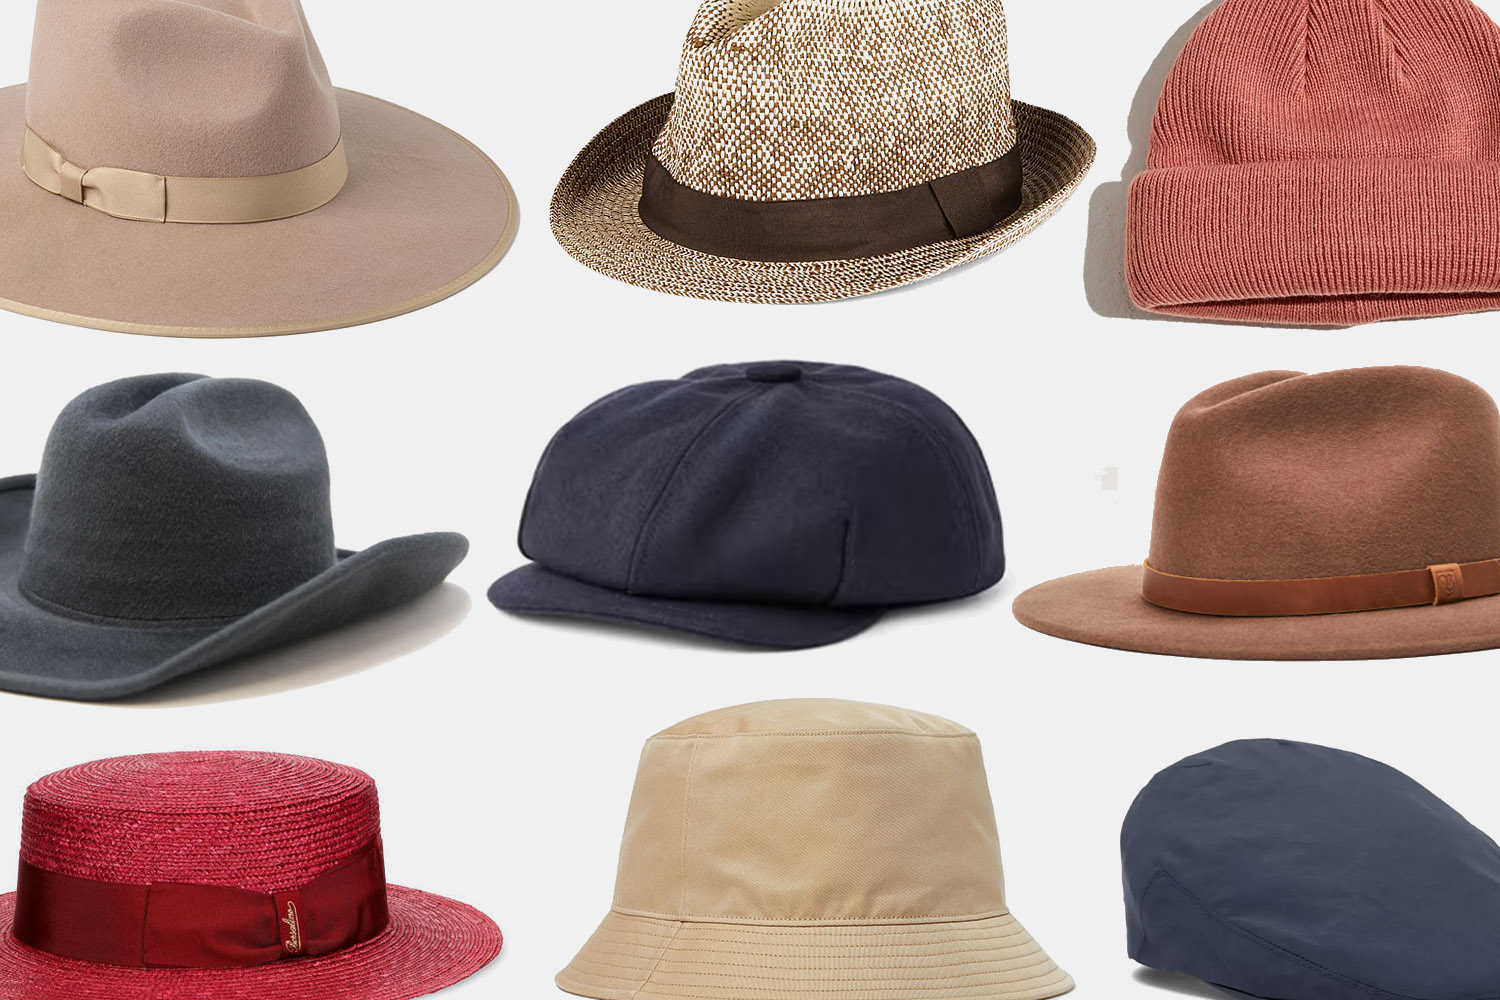 Hats are back on top - Los Angeles Times